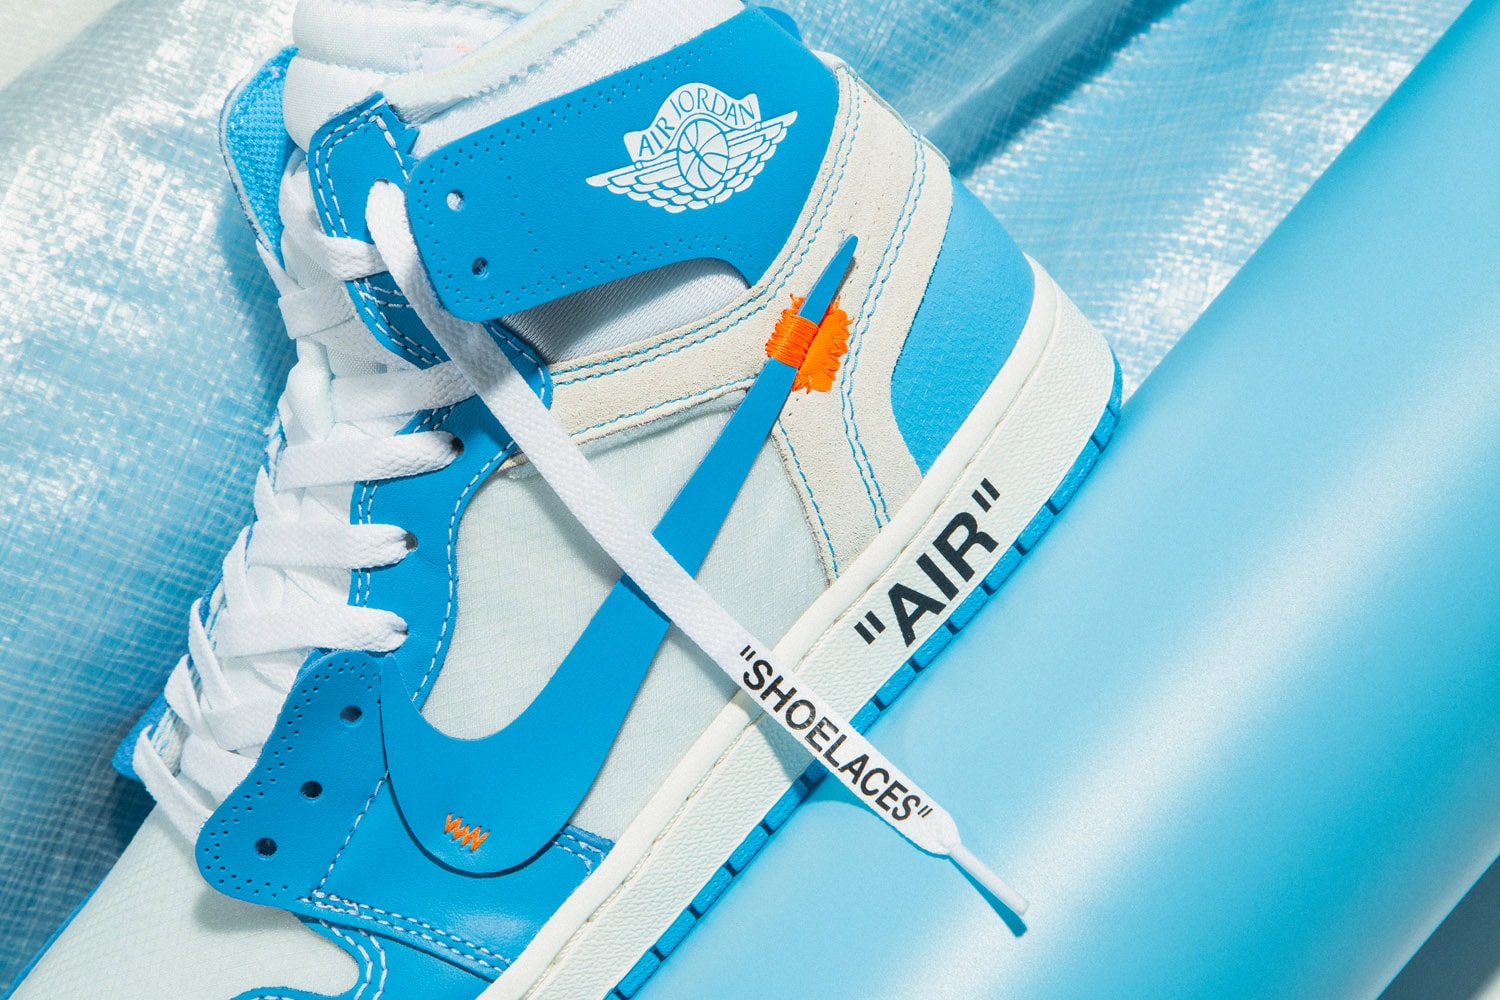 Virgil Abloh Officially Debuts the 'UNC' Off-White x Air Jordan 1